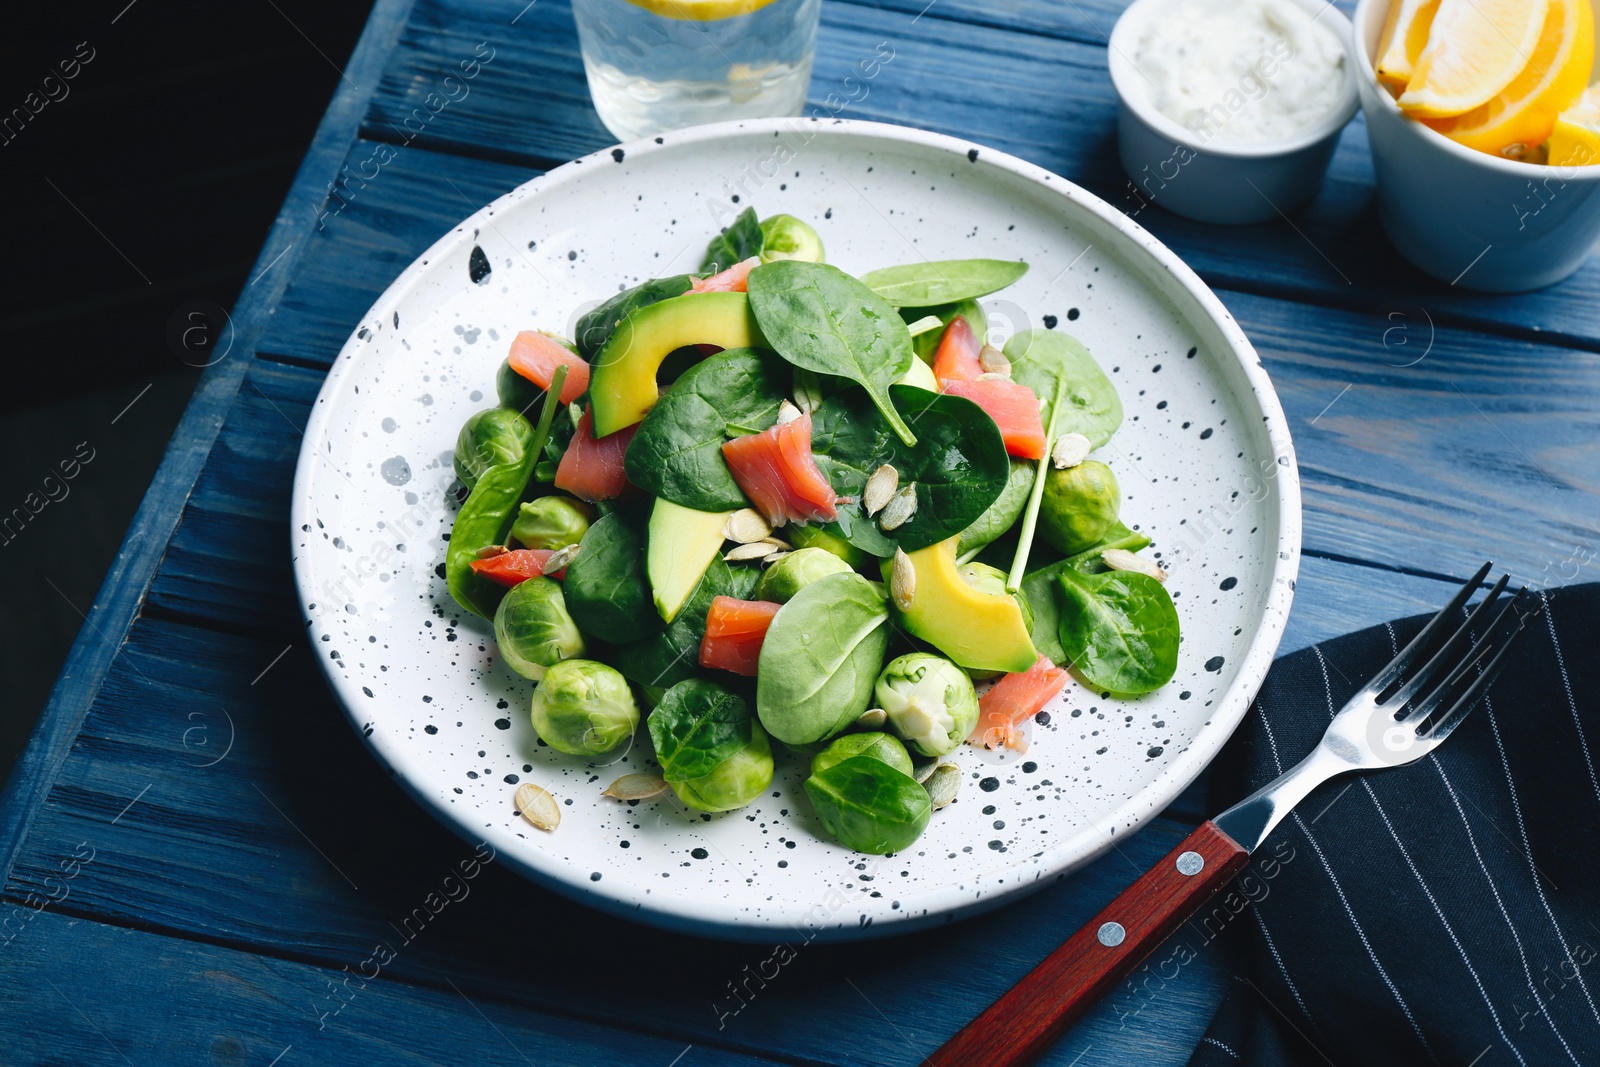 Image of Tasty salad with Brussels sprouts served on blue wooden table. Food photography  